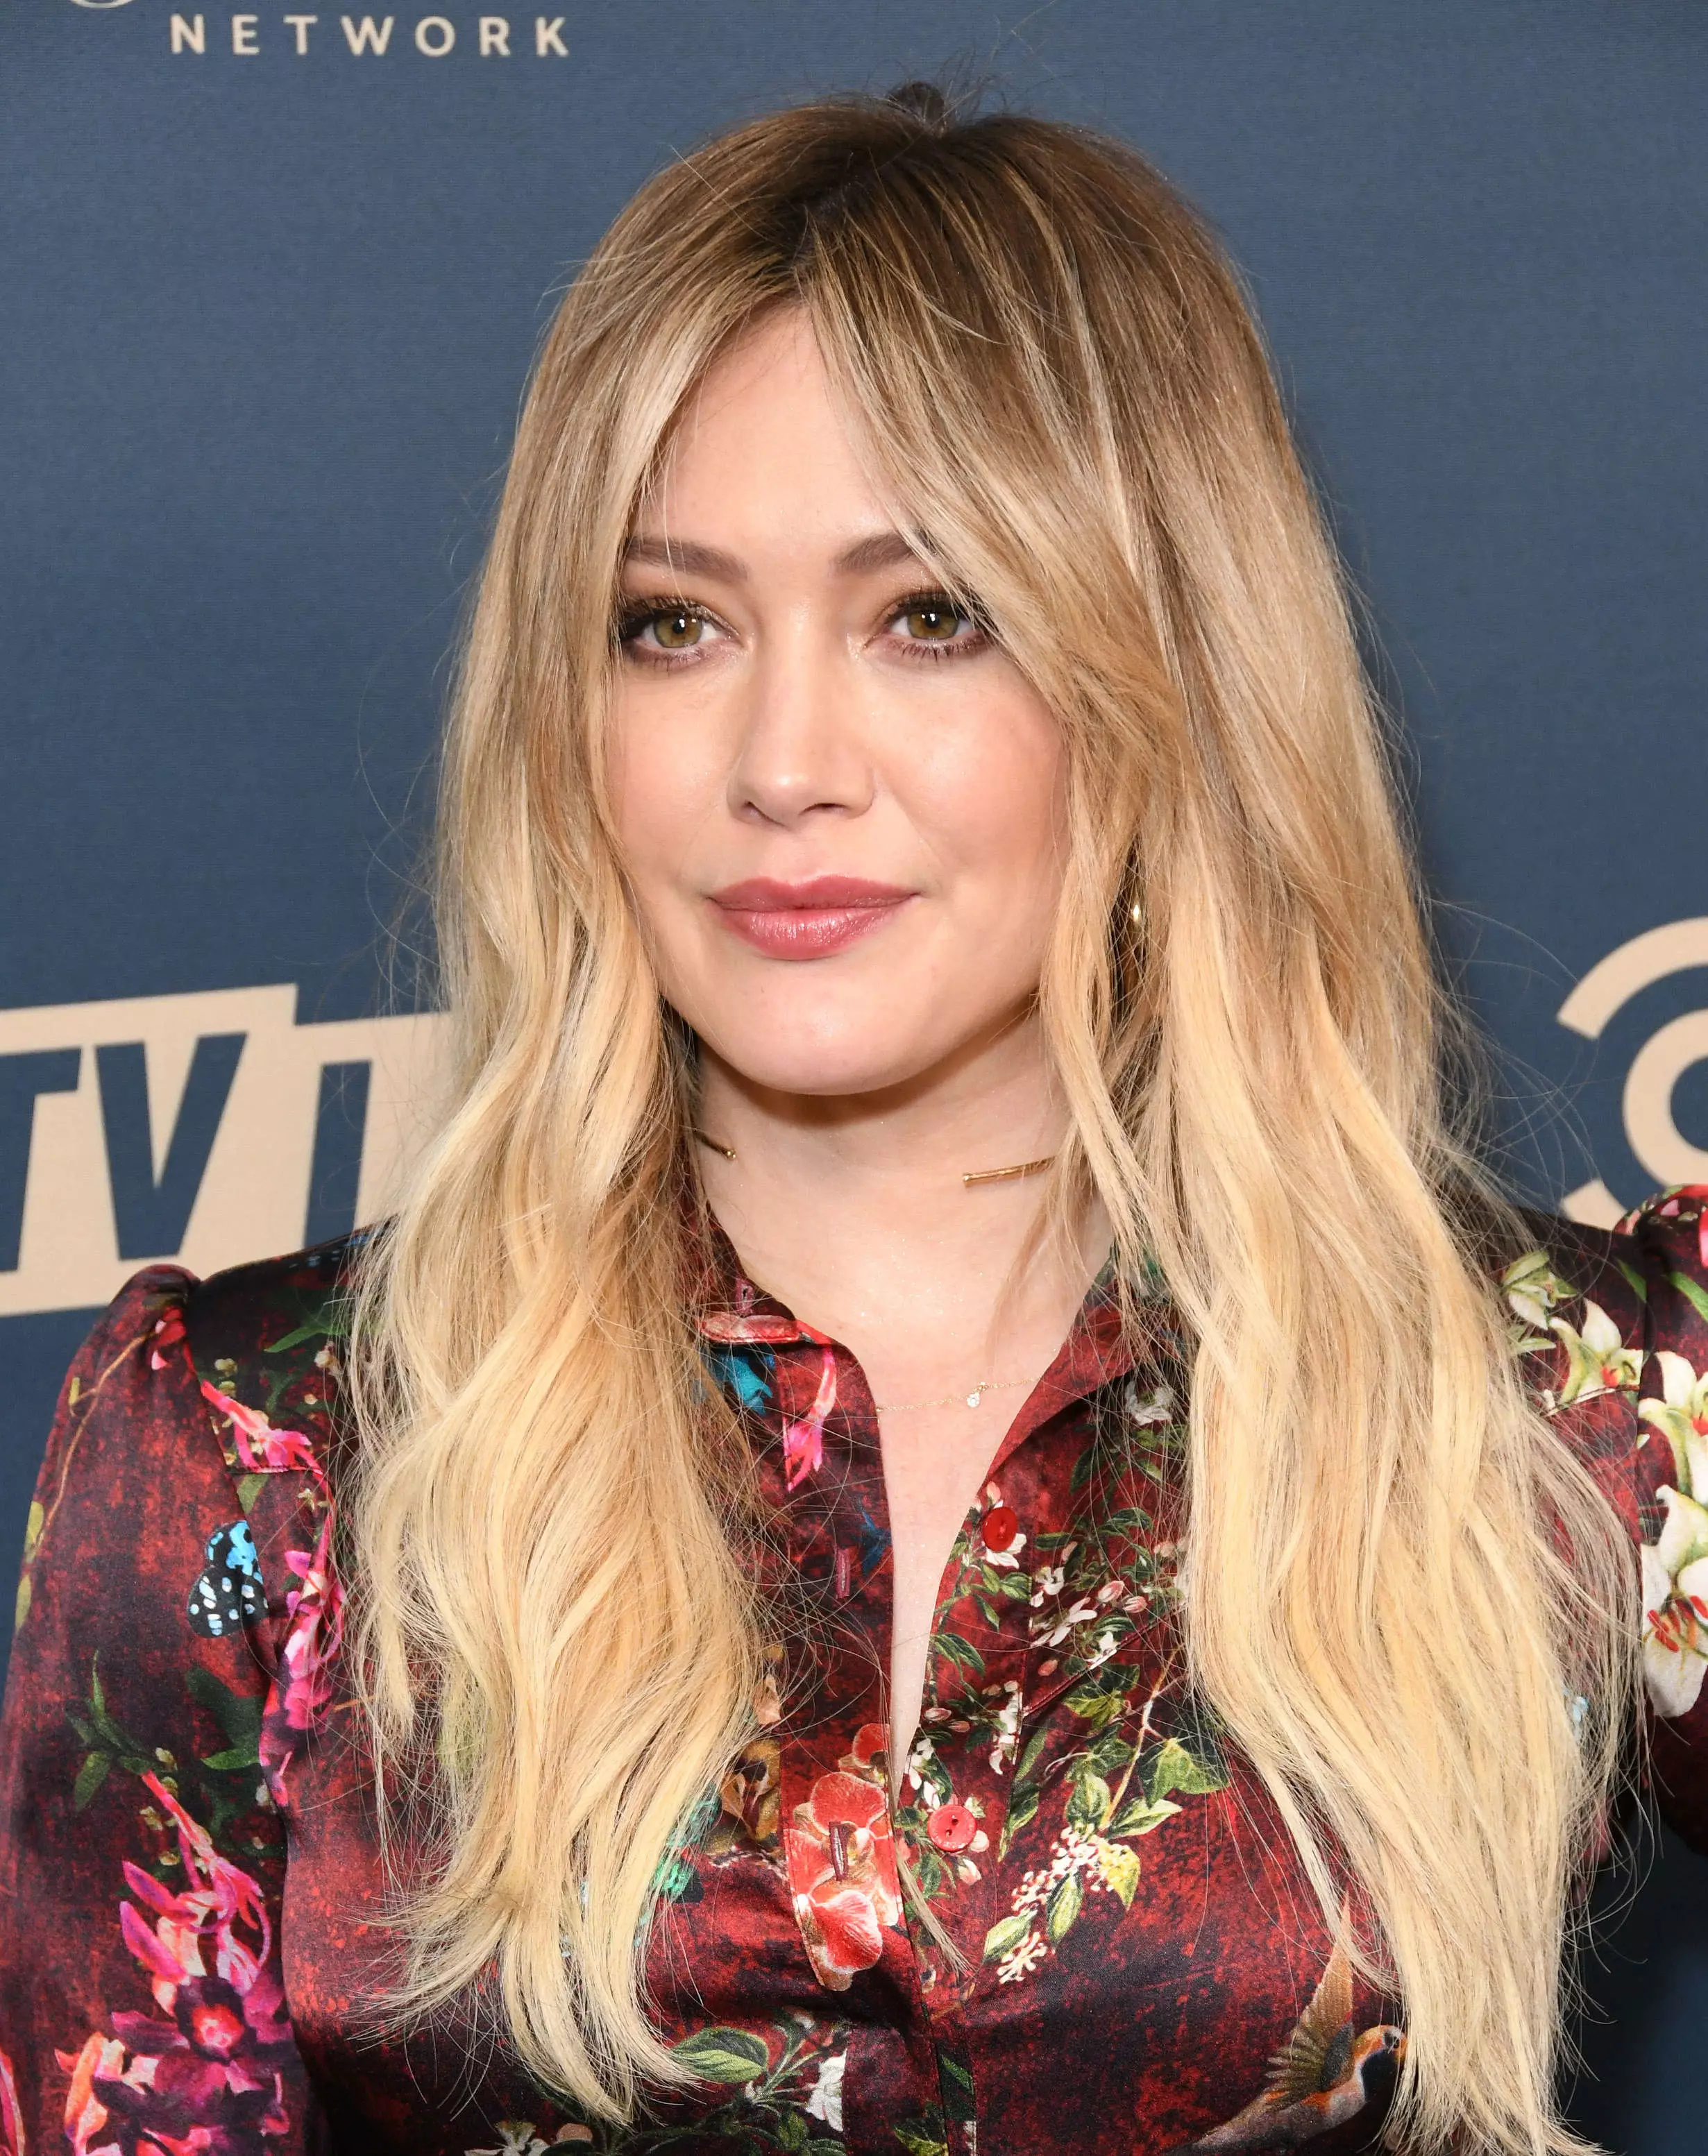 Hilary Duff has called out the plot hole (